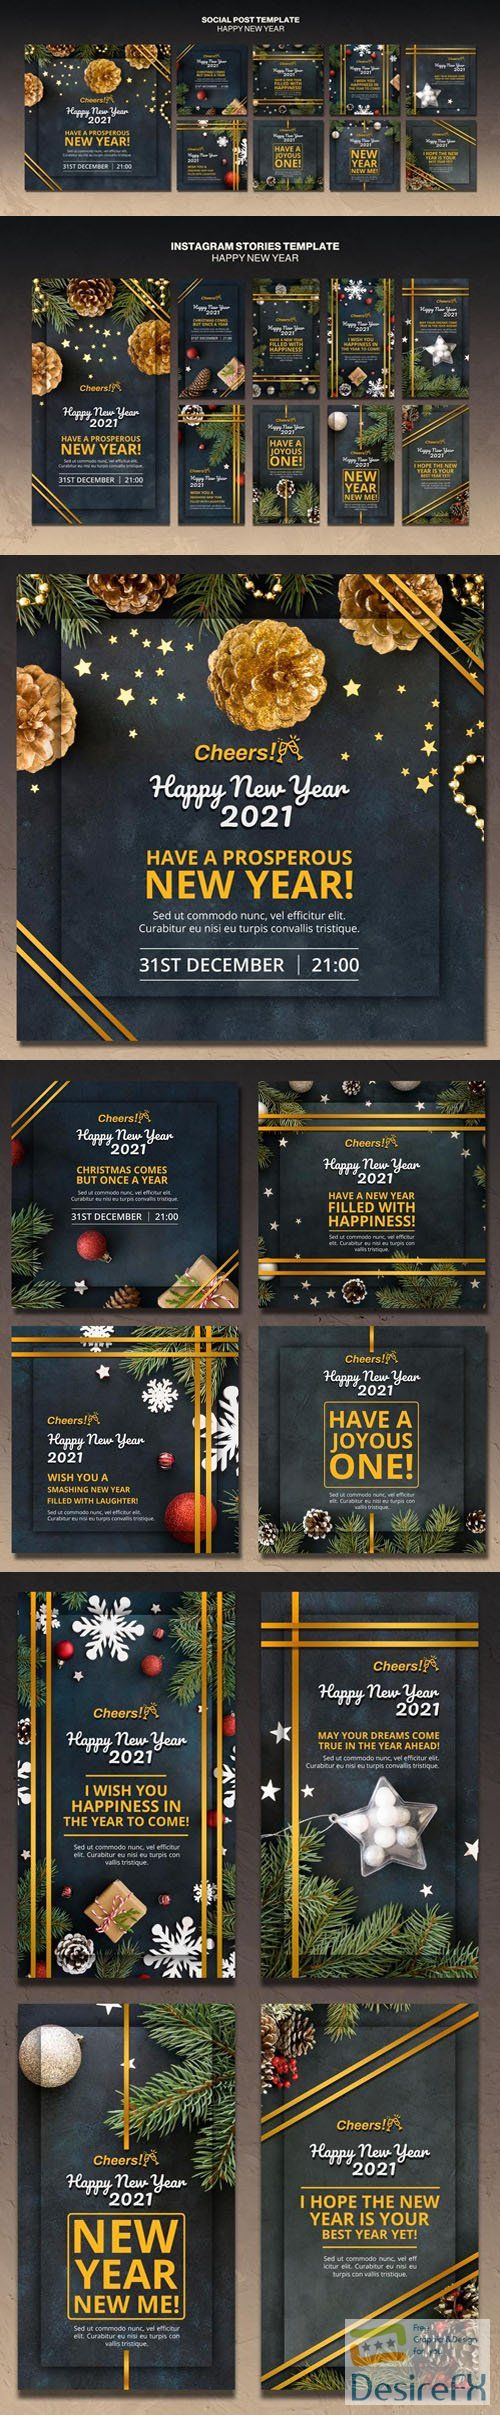 Happy New Year 2021 Social Media Posts &amp; Instagram Stories PSD Templates